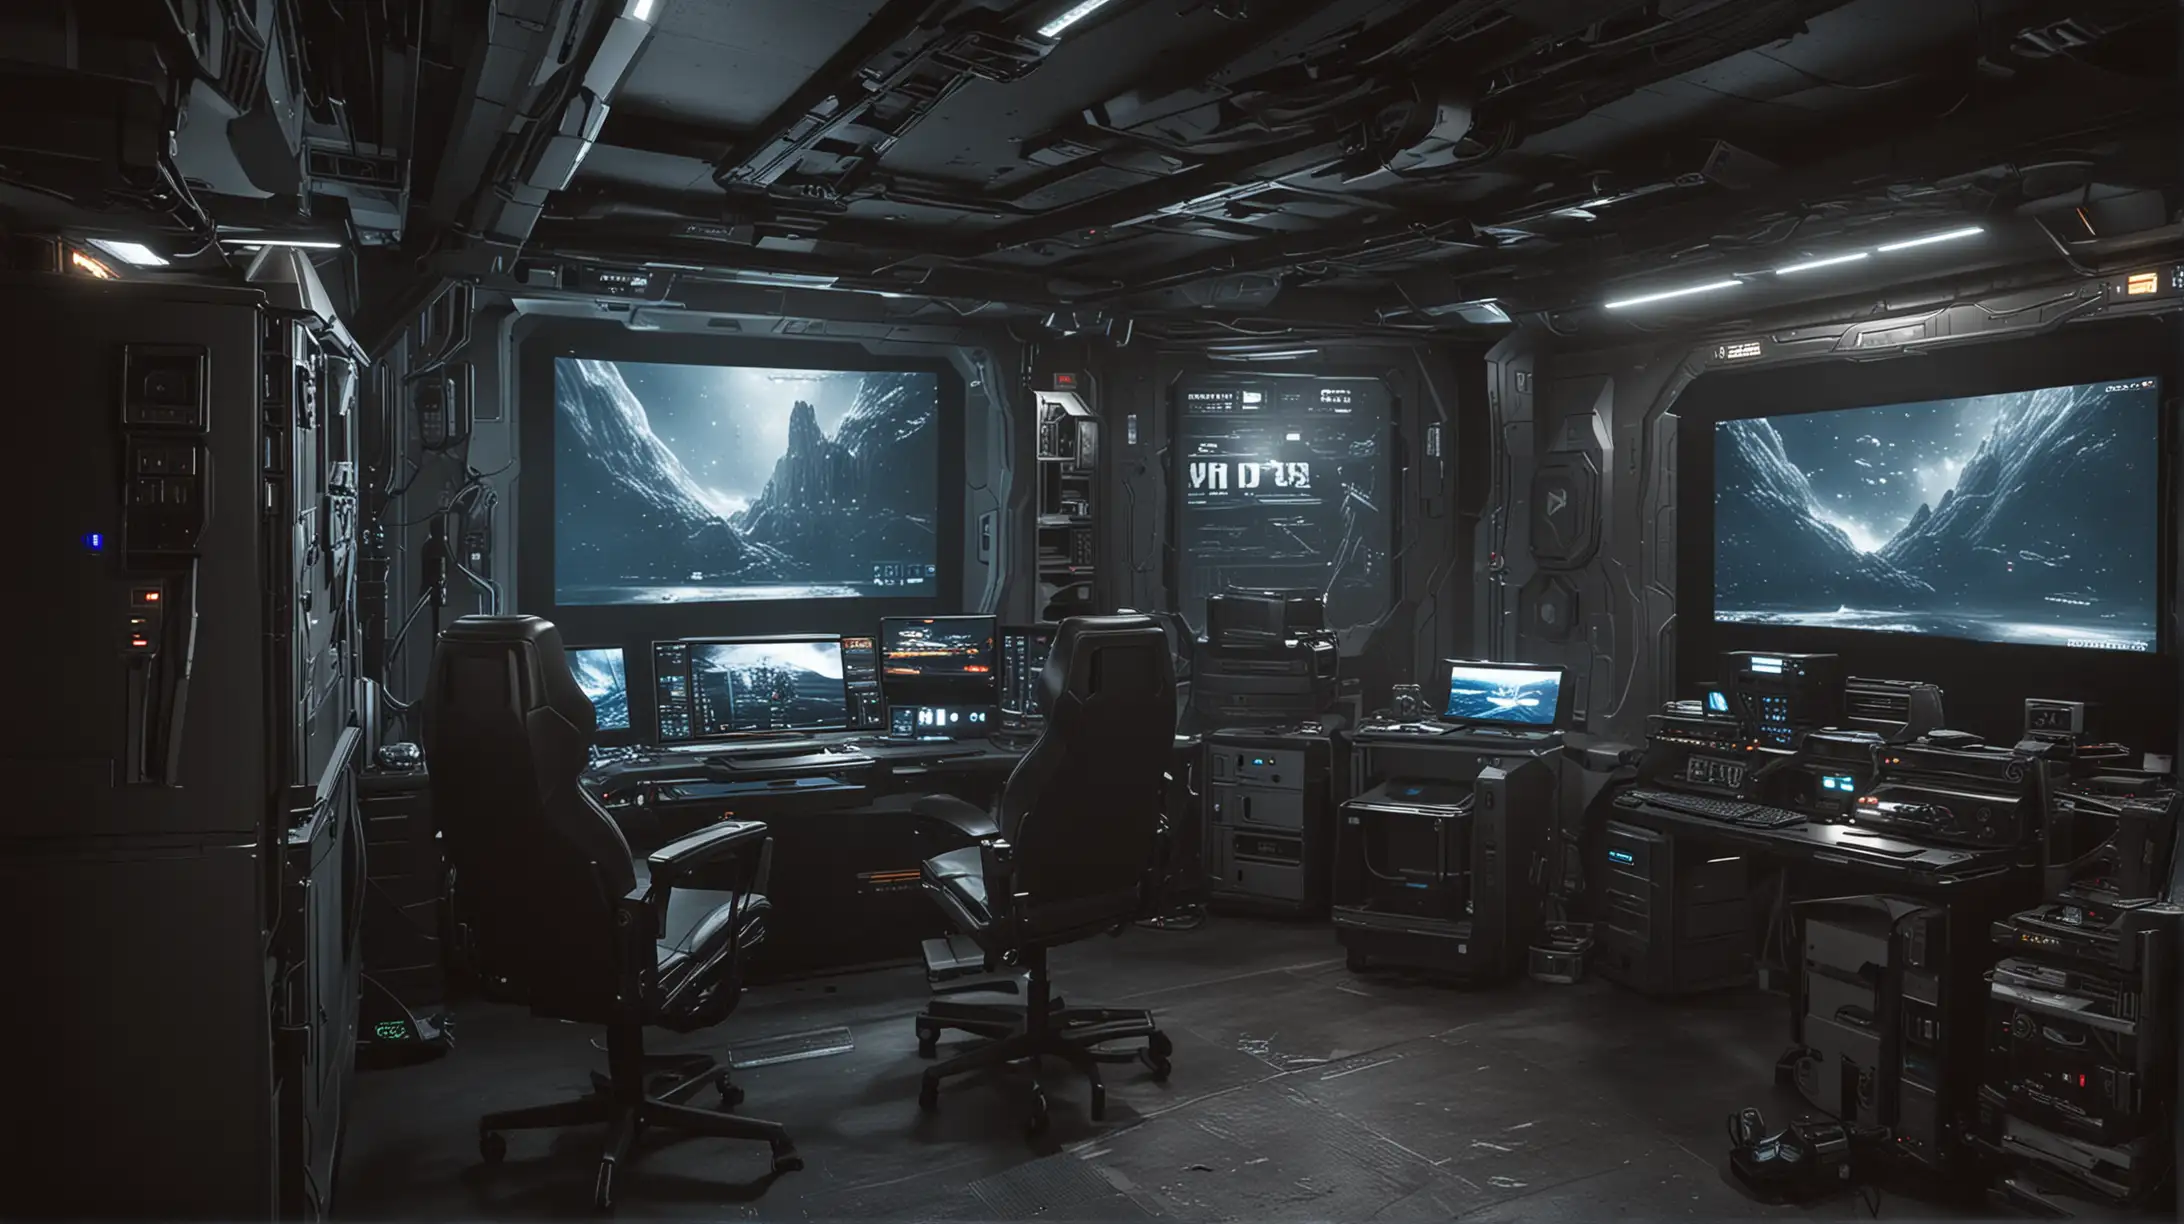 The greatest Batcave-looking PC computer setup to play Star Citizen and home cinema ever for any geek and PC gamer in a small sized room.